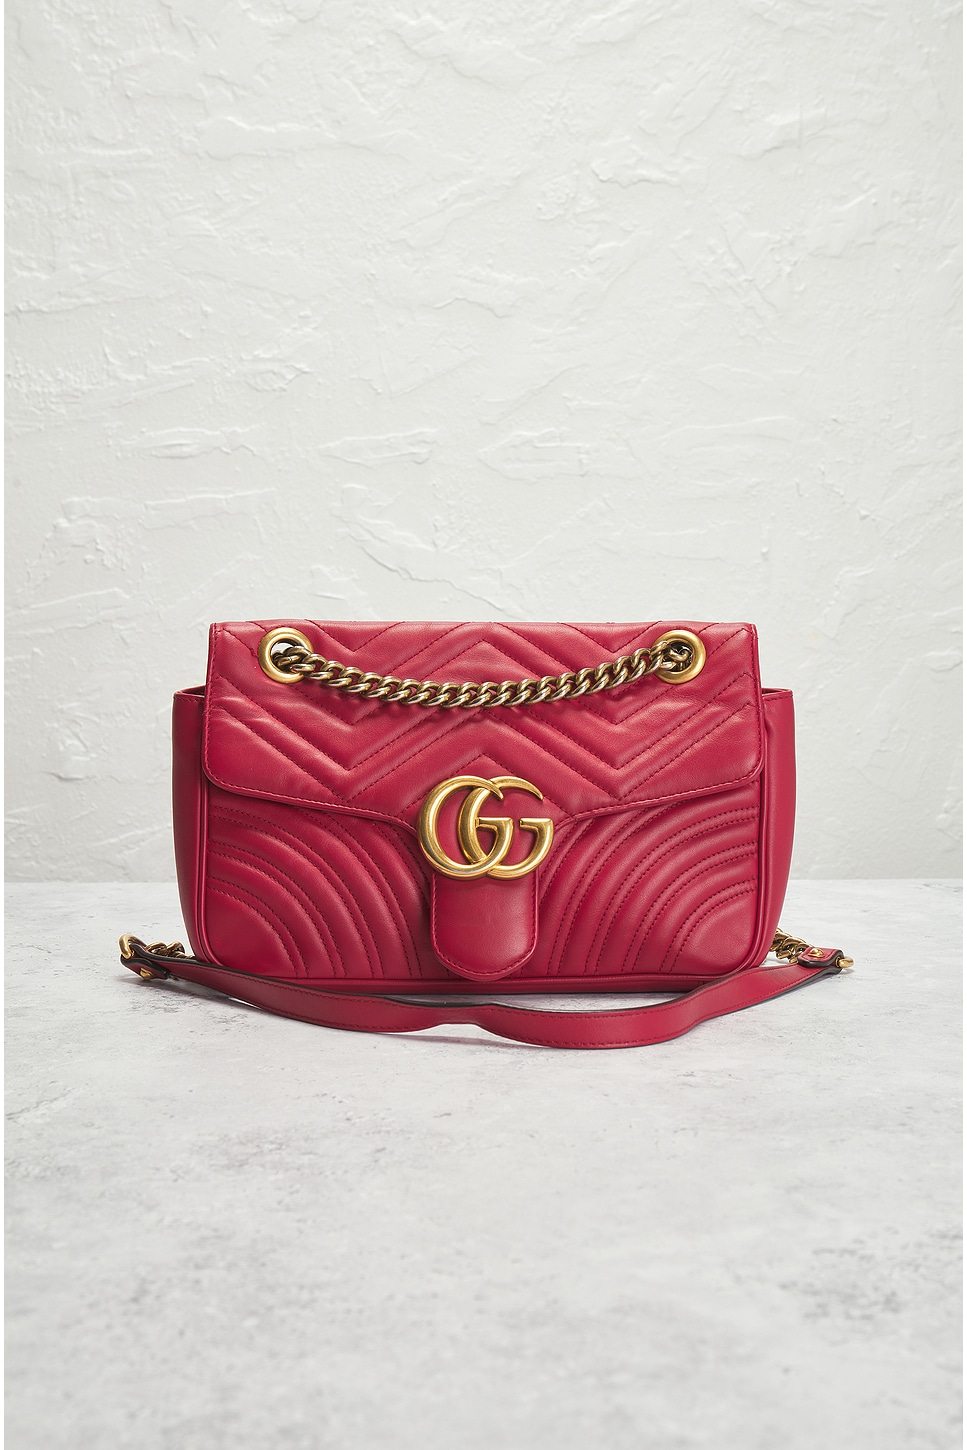 Shop Gucci Gg Marmont Chain Shoulder Bag In Red